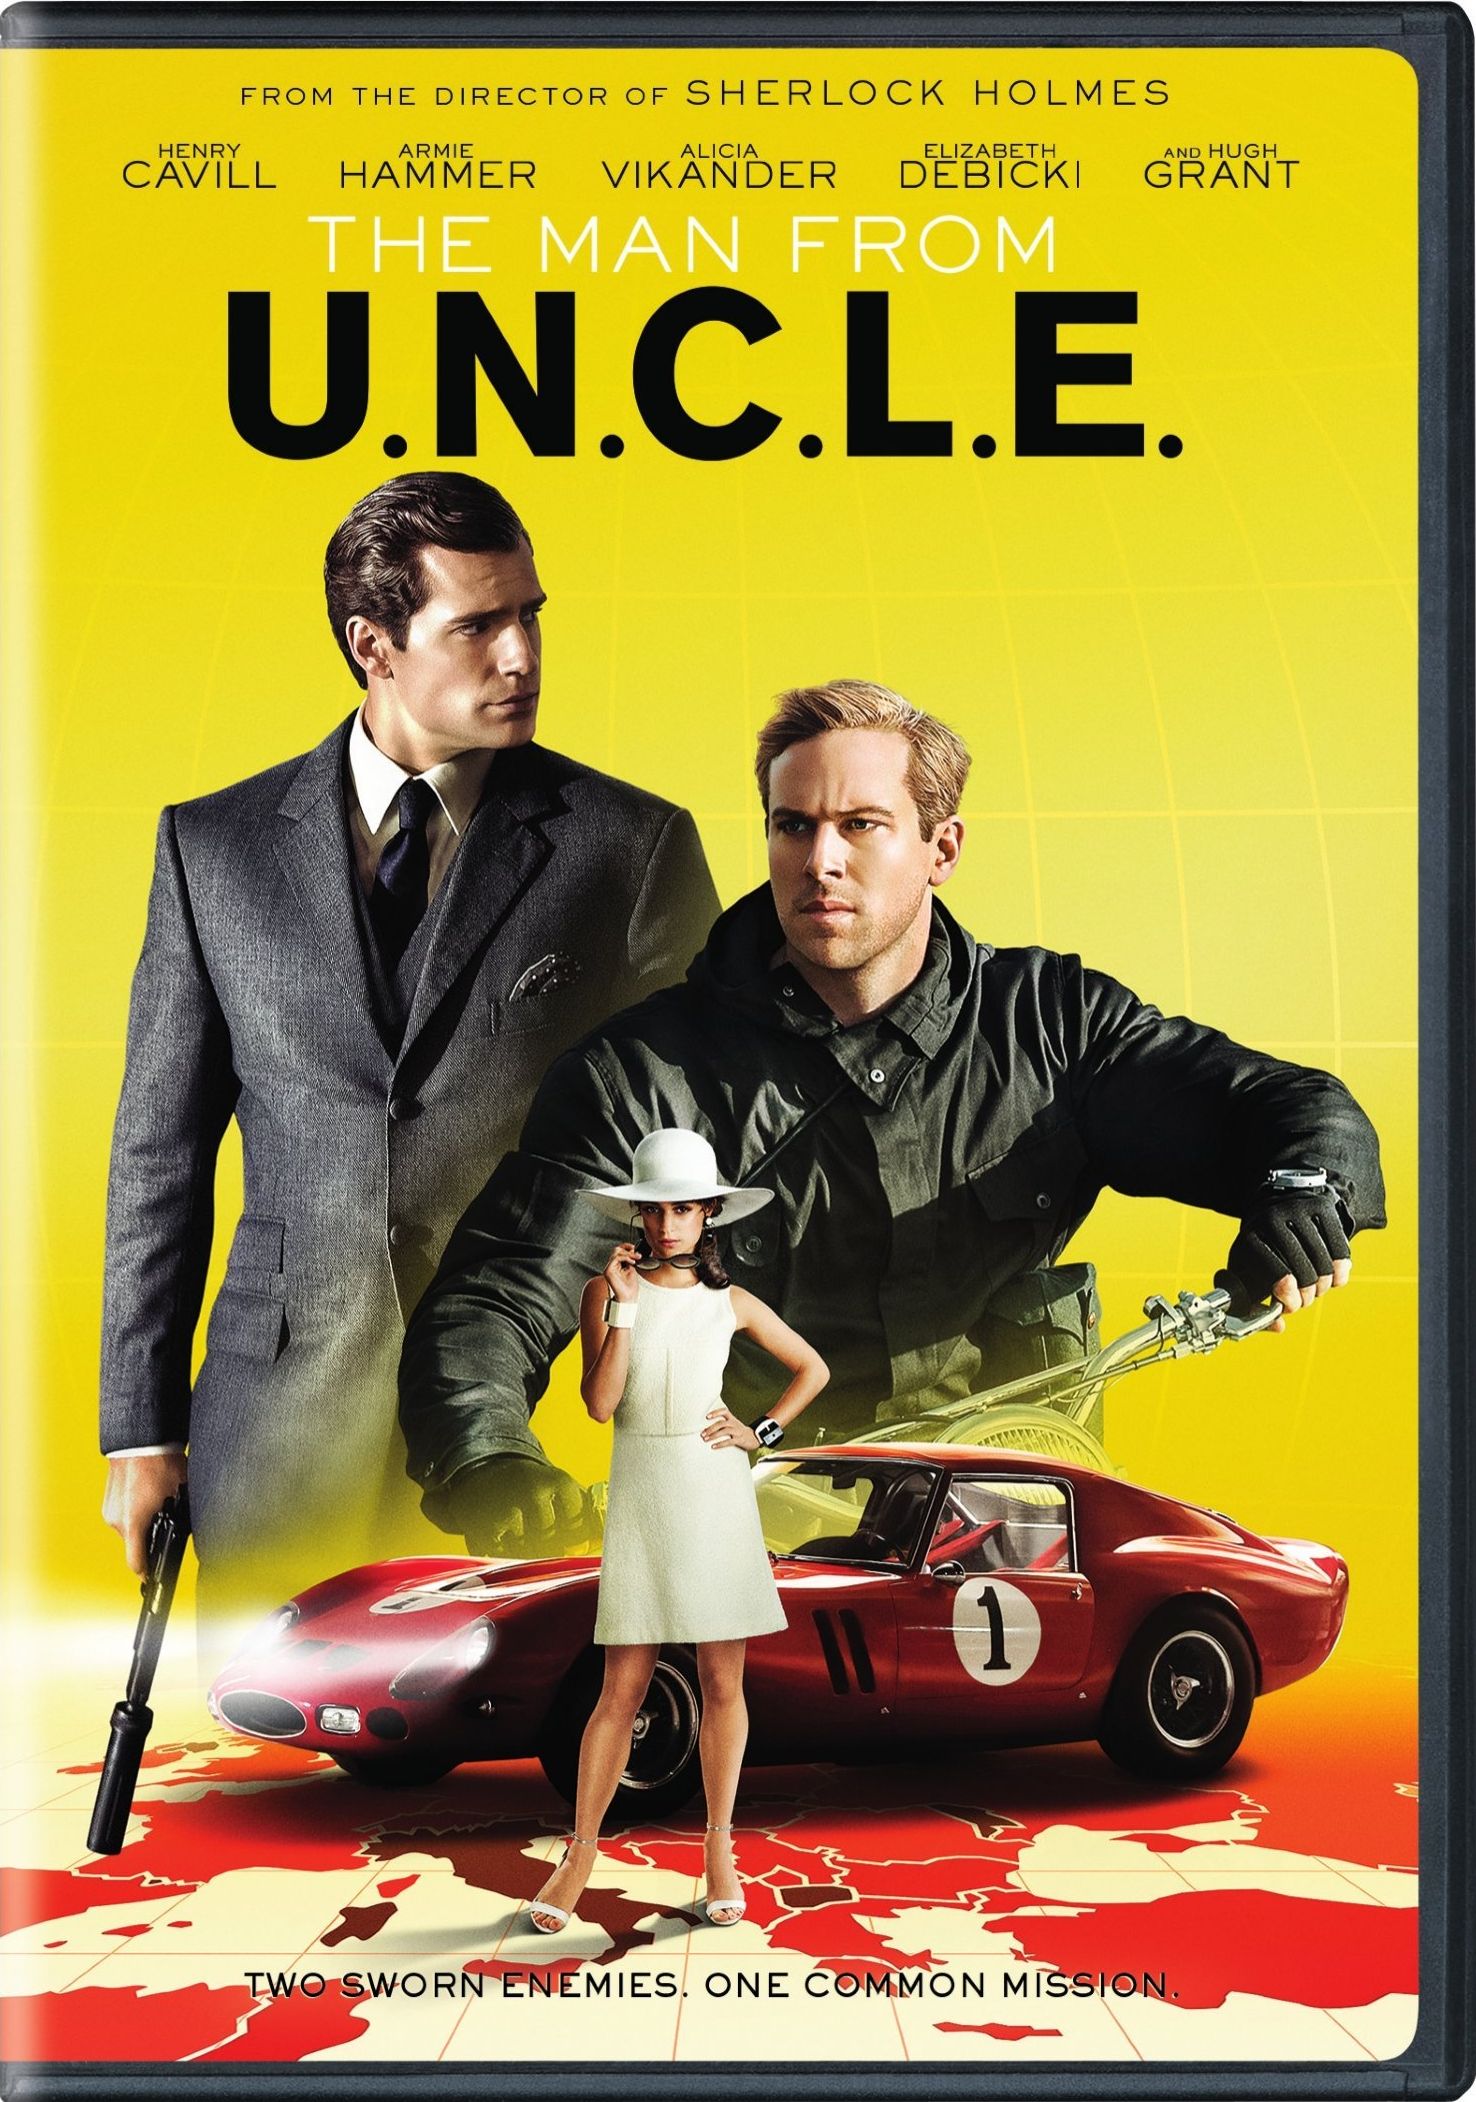 The Man From U.N.C.L.E. #6